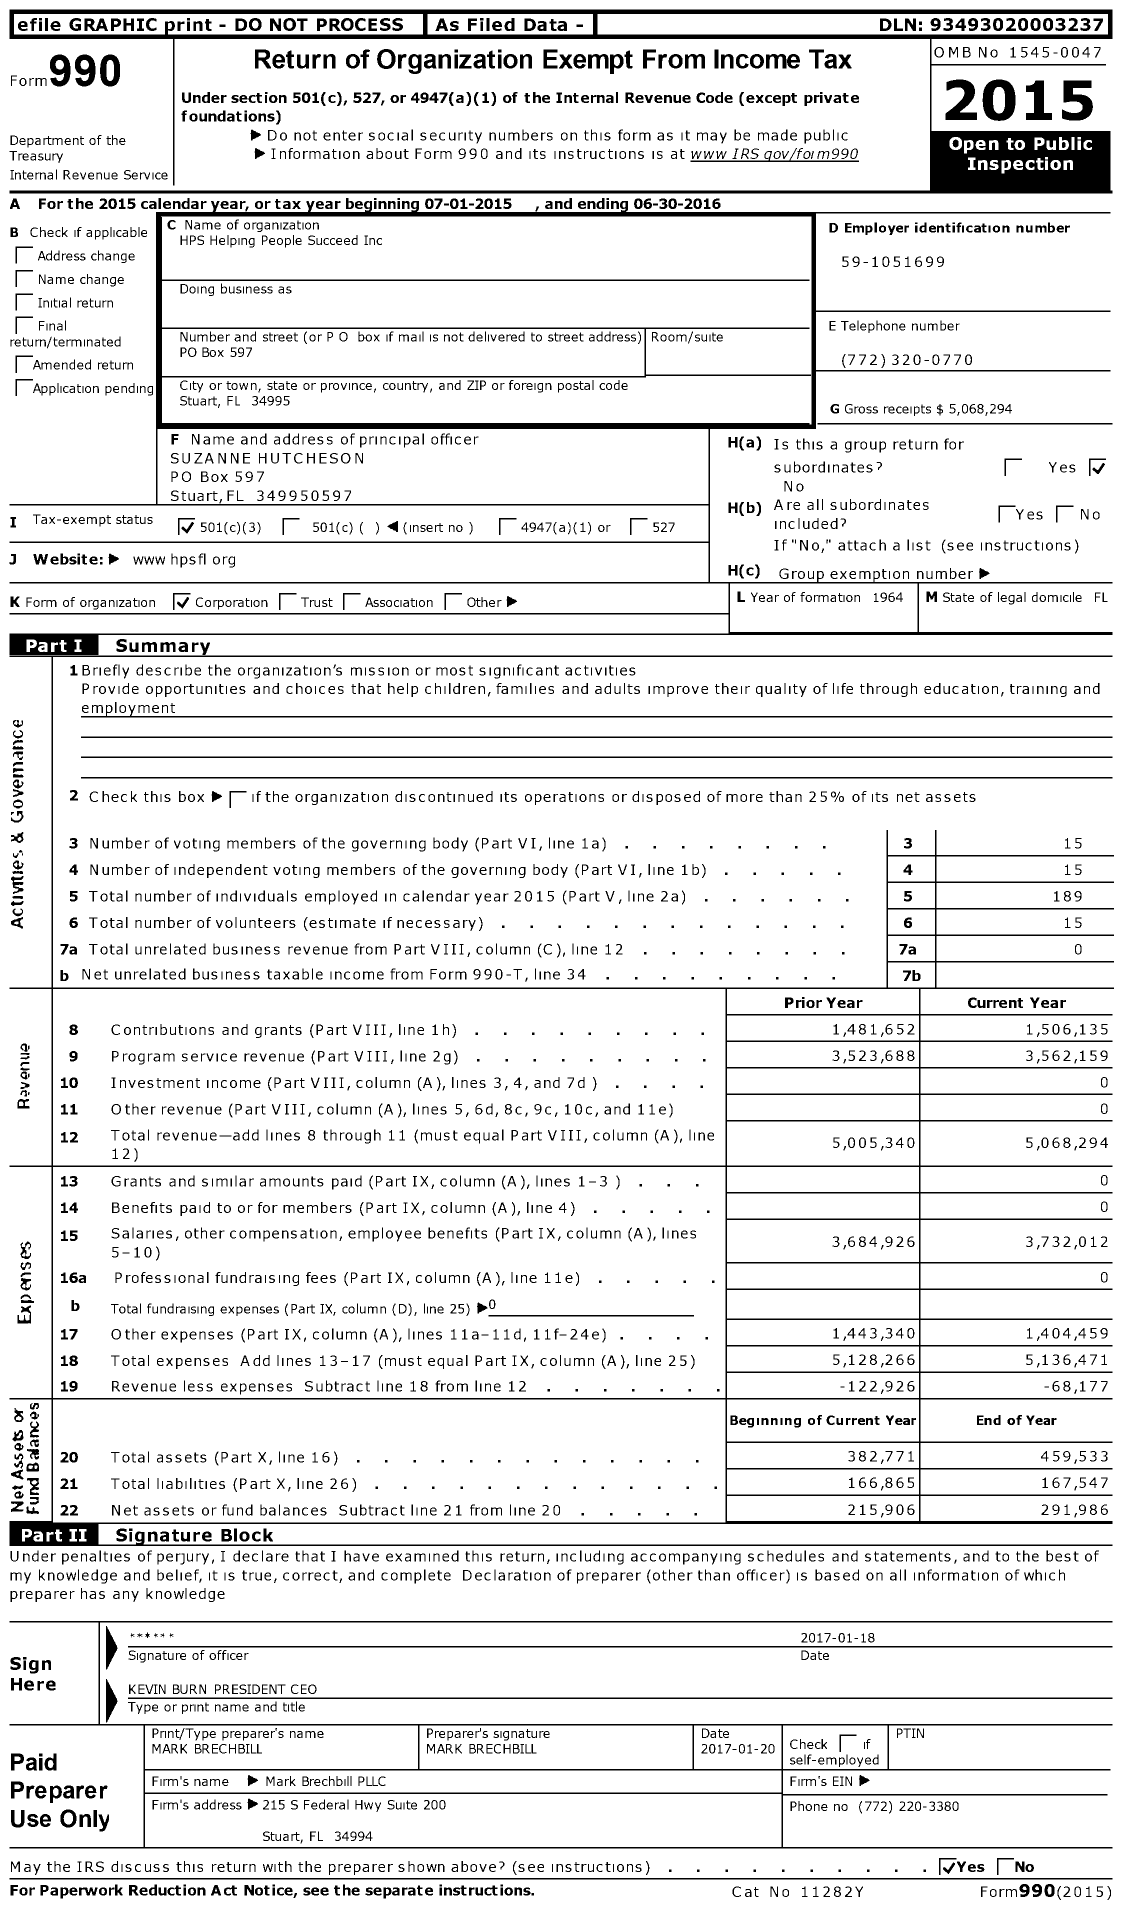 Image of first page of 2015 Form 990 for Helping People Succeed (HPS)